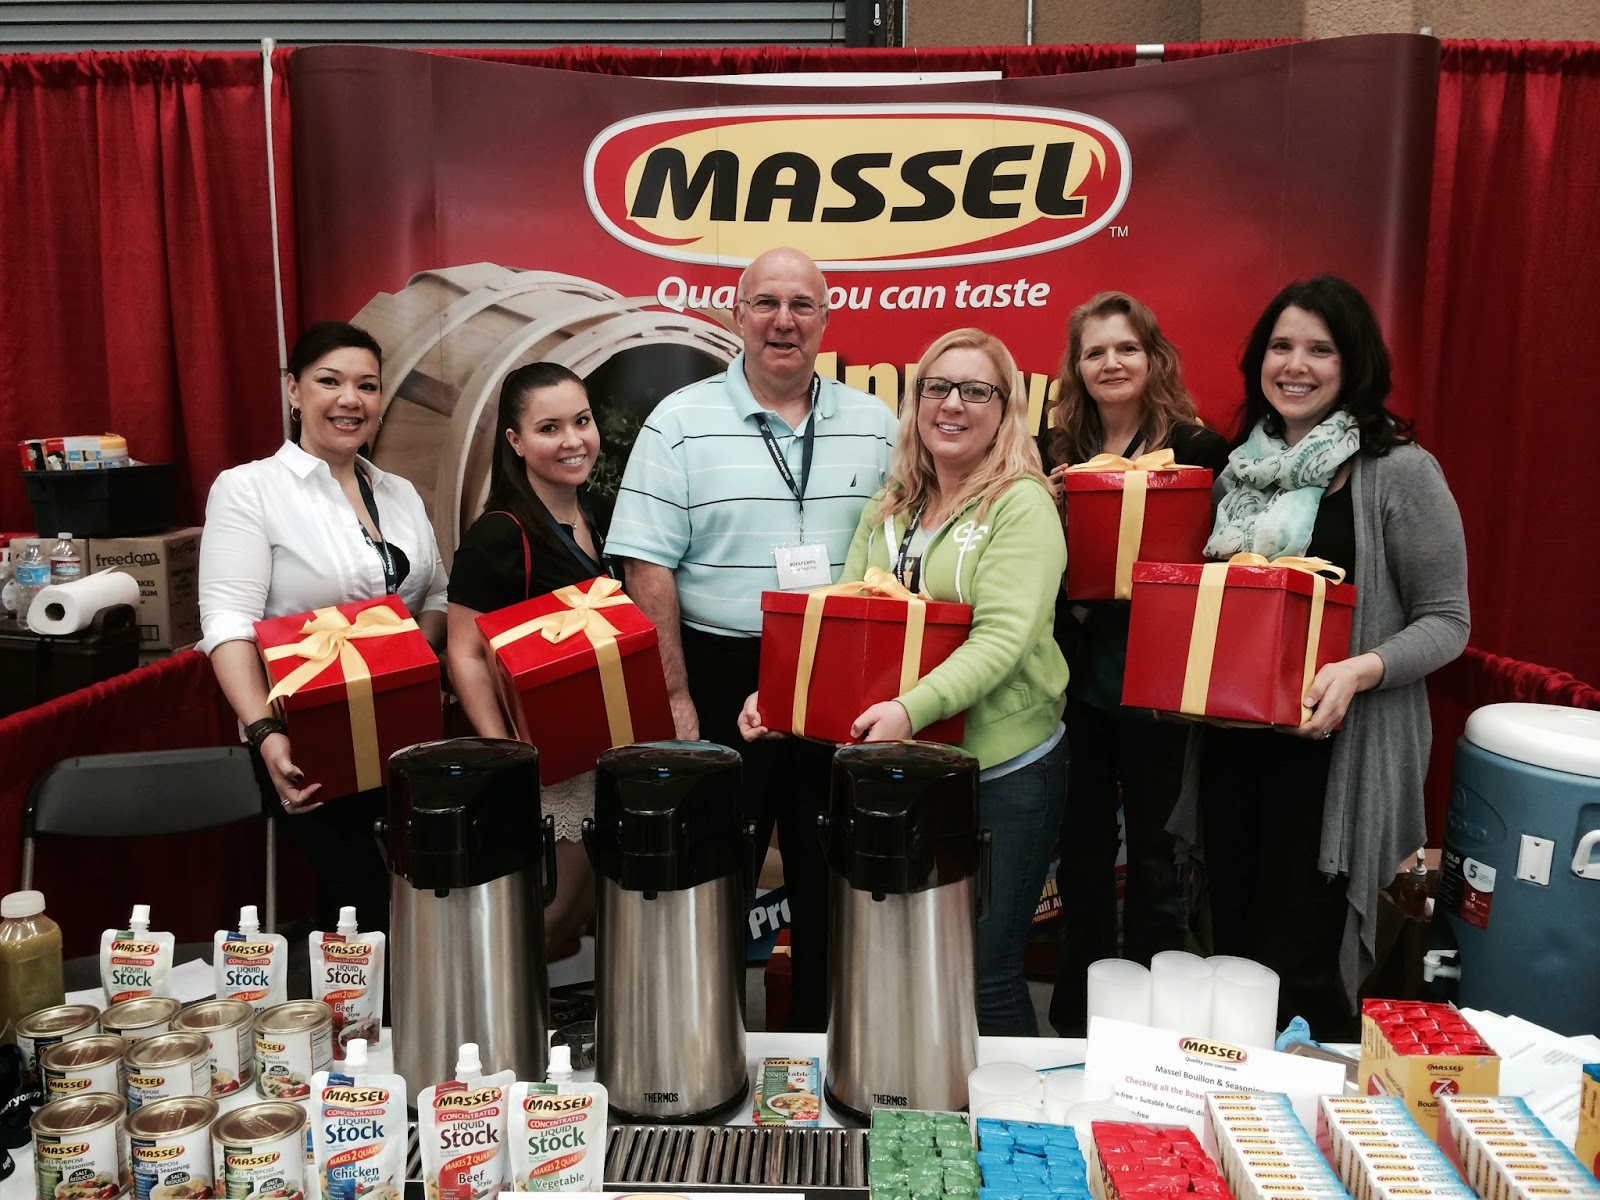 bloggers at the Gluten-Free & Allergy-Friendly Expo holding boxes of Massel products behind a table of Massel products